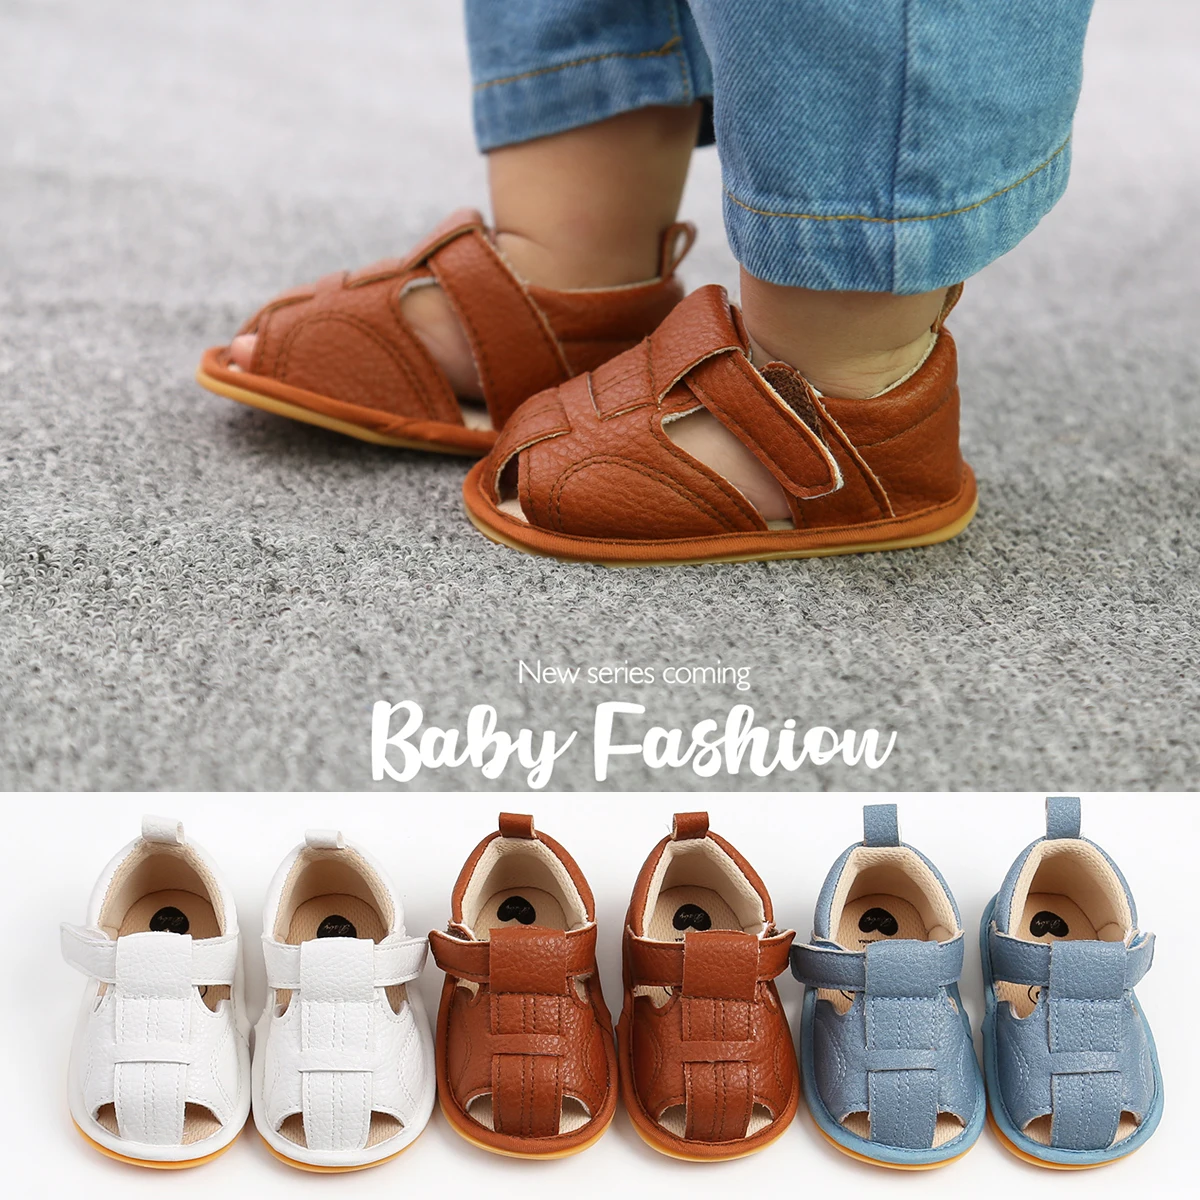 Infant Baby Sandals & Slippers Non-Slip PU Leather Soles For Comfort and Safety Baby Shoes